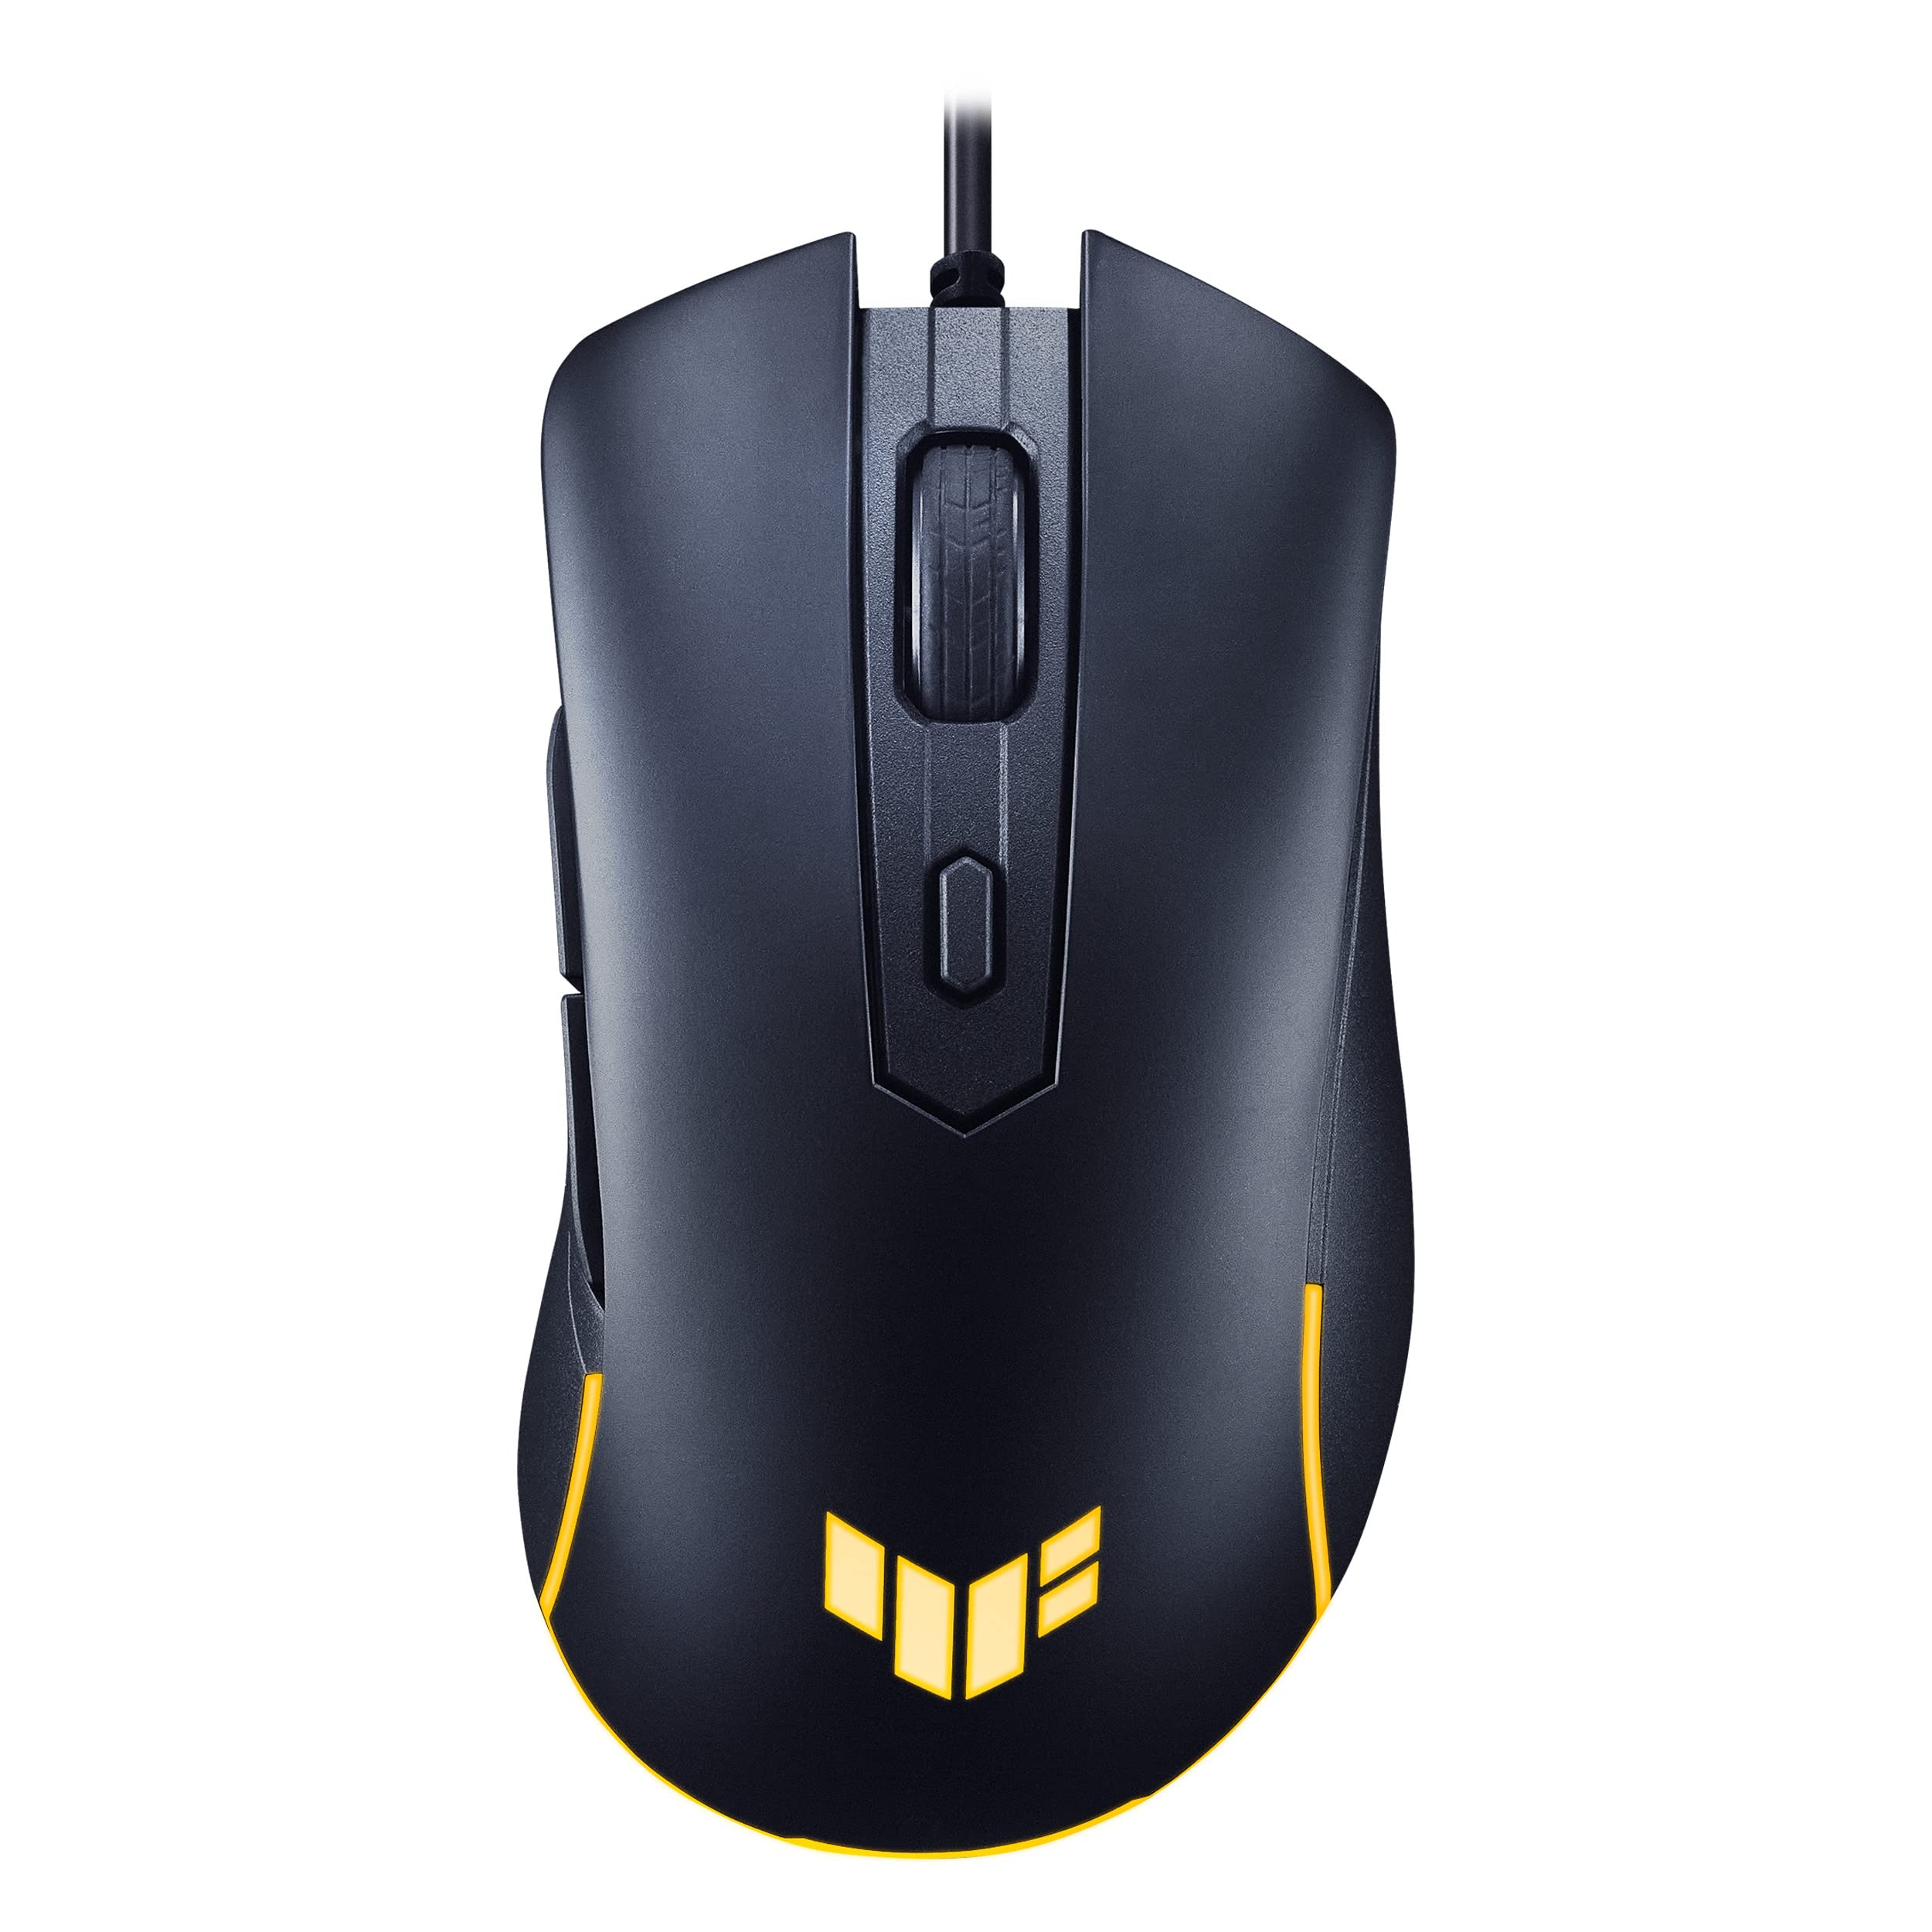 ASUS TUF Gaming M3 Gen II Gaming Mouse, Wired, 59g Lightweight, IP56 dust & Water Resistance, Antibacterial Guard, 8K DPI Optical Sensor, 6 Programmable Buttons, Teflon Mouse feet, Black